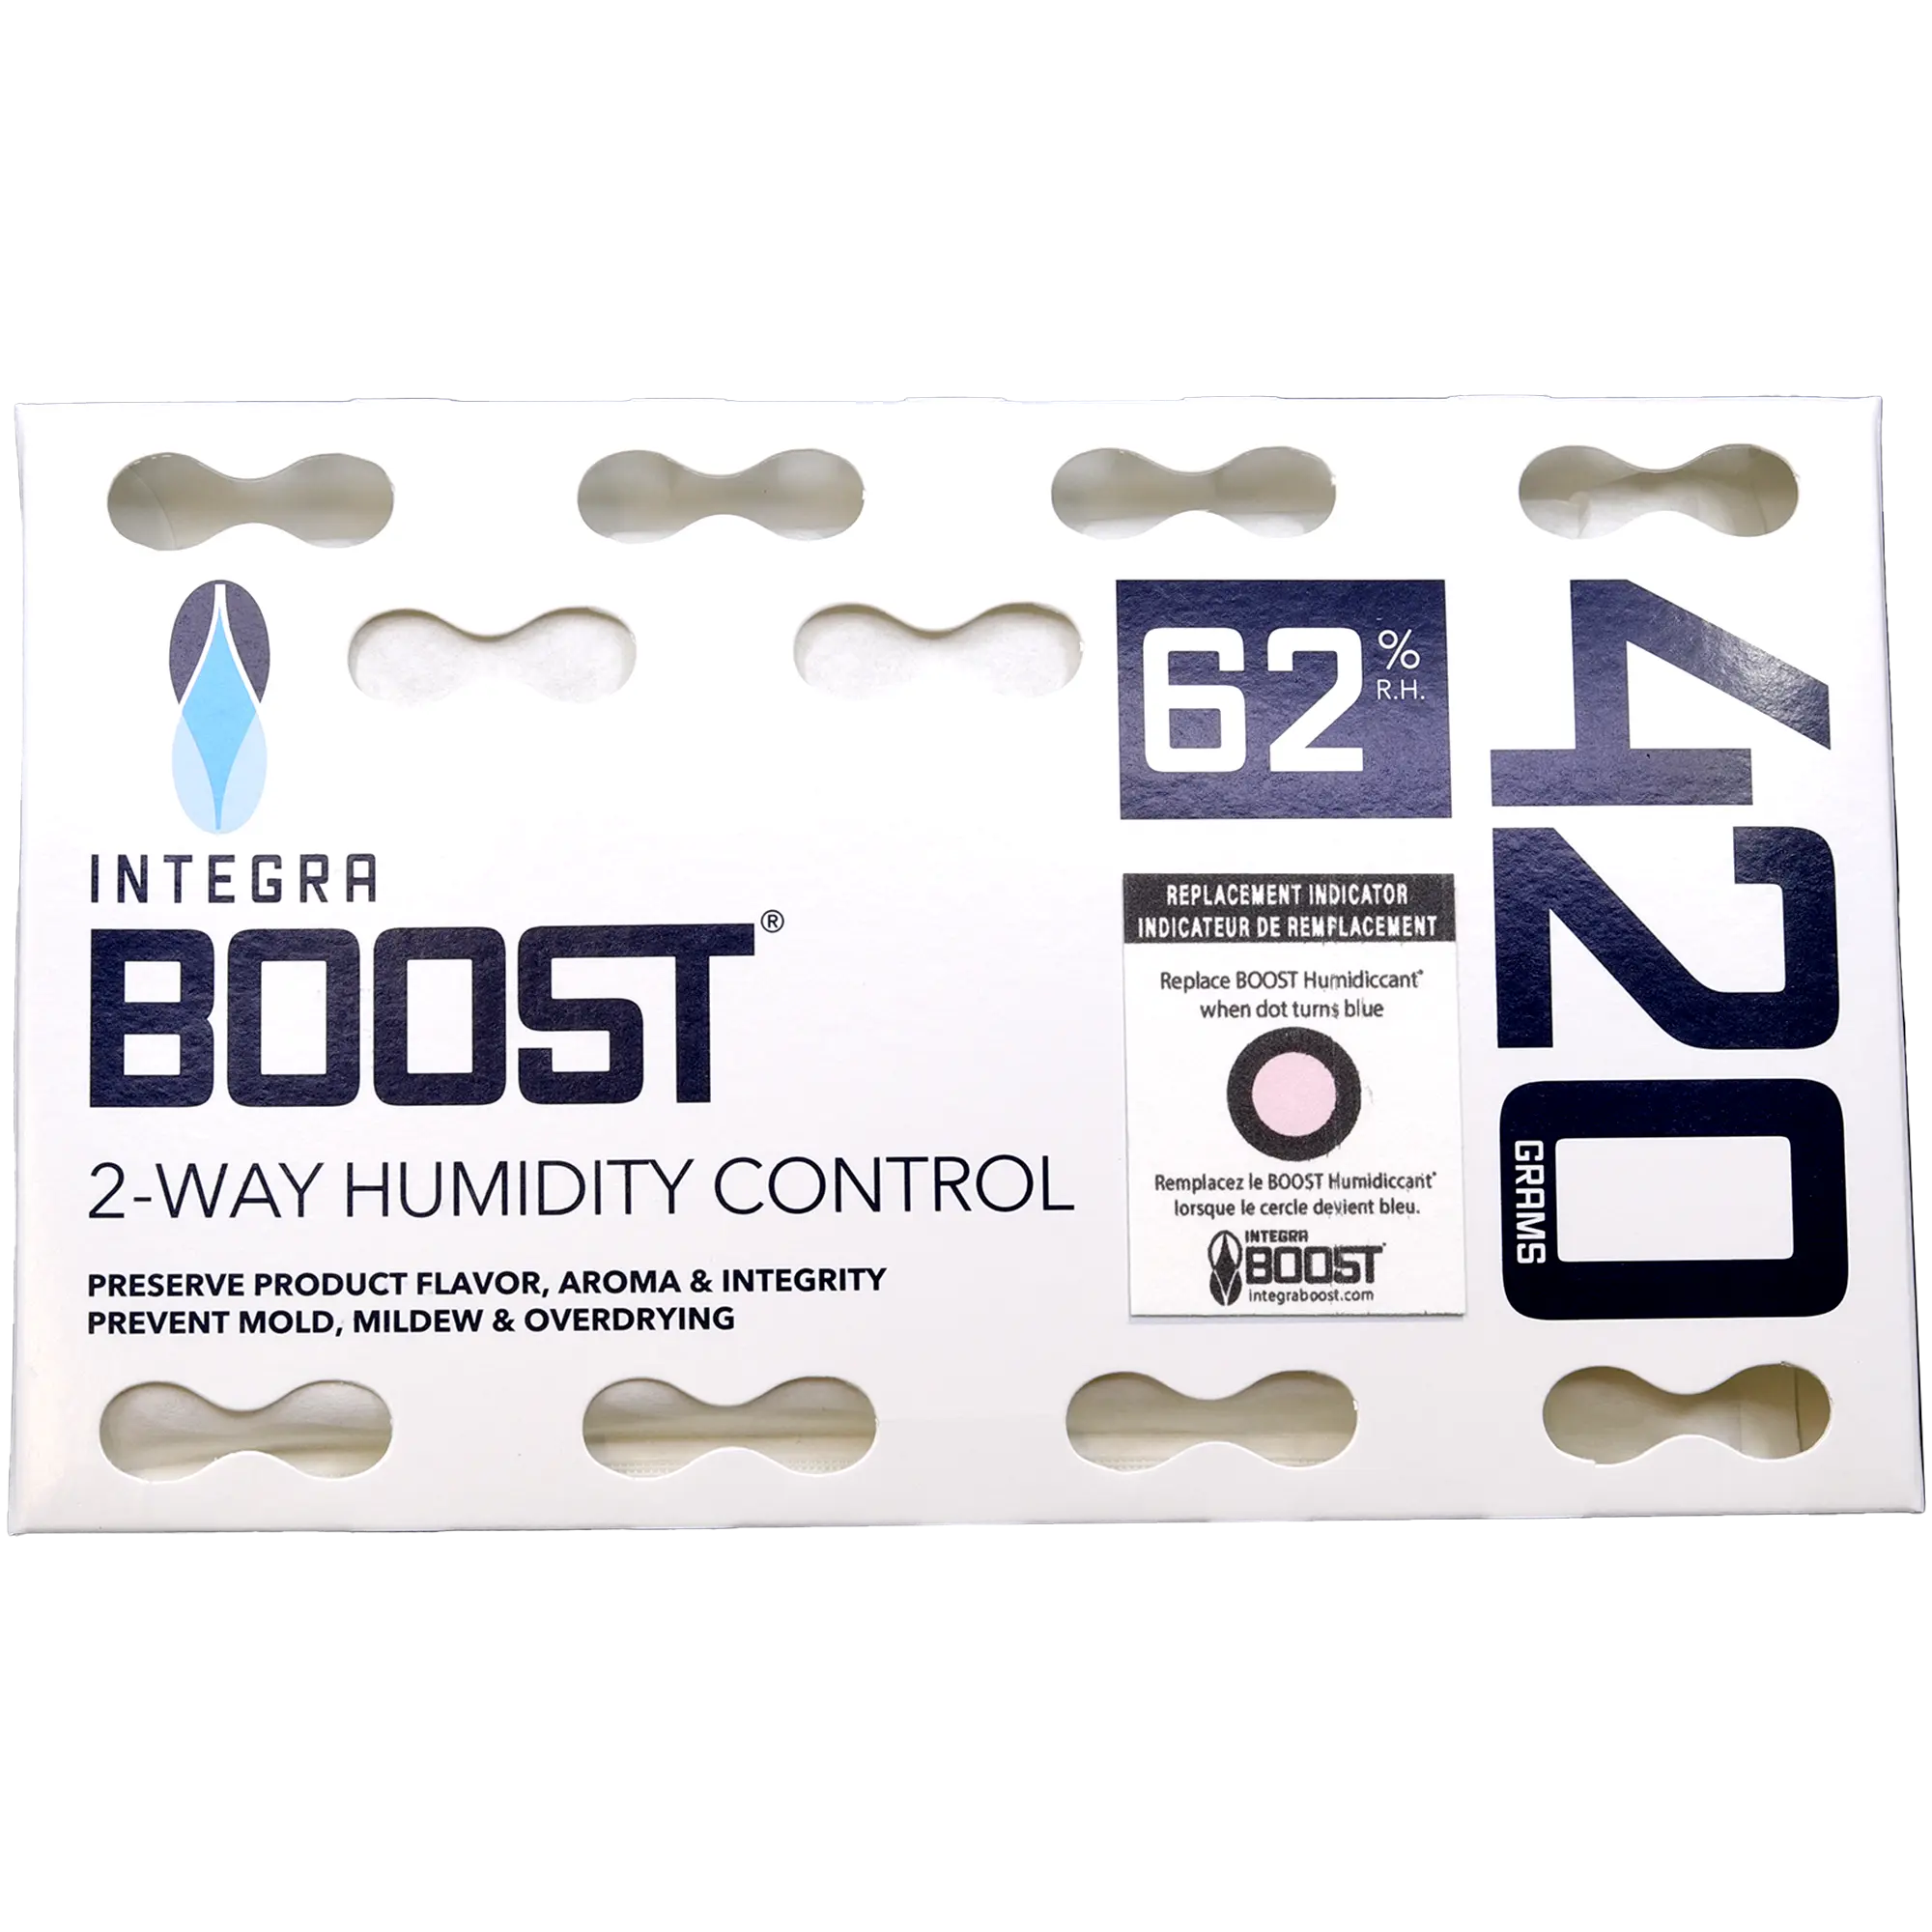 Integra Boost 420g Befeuchterpack 62% R.H.
